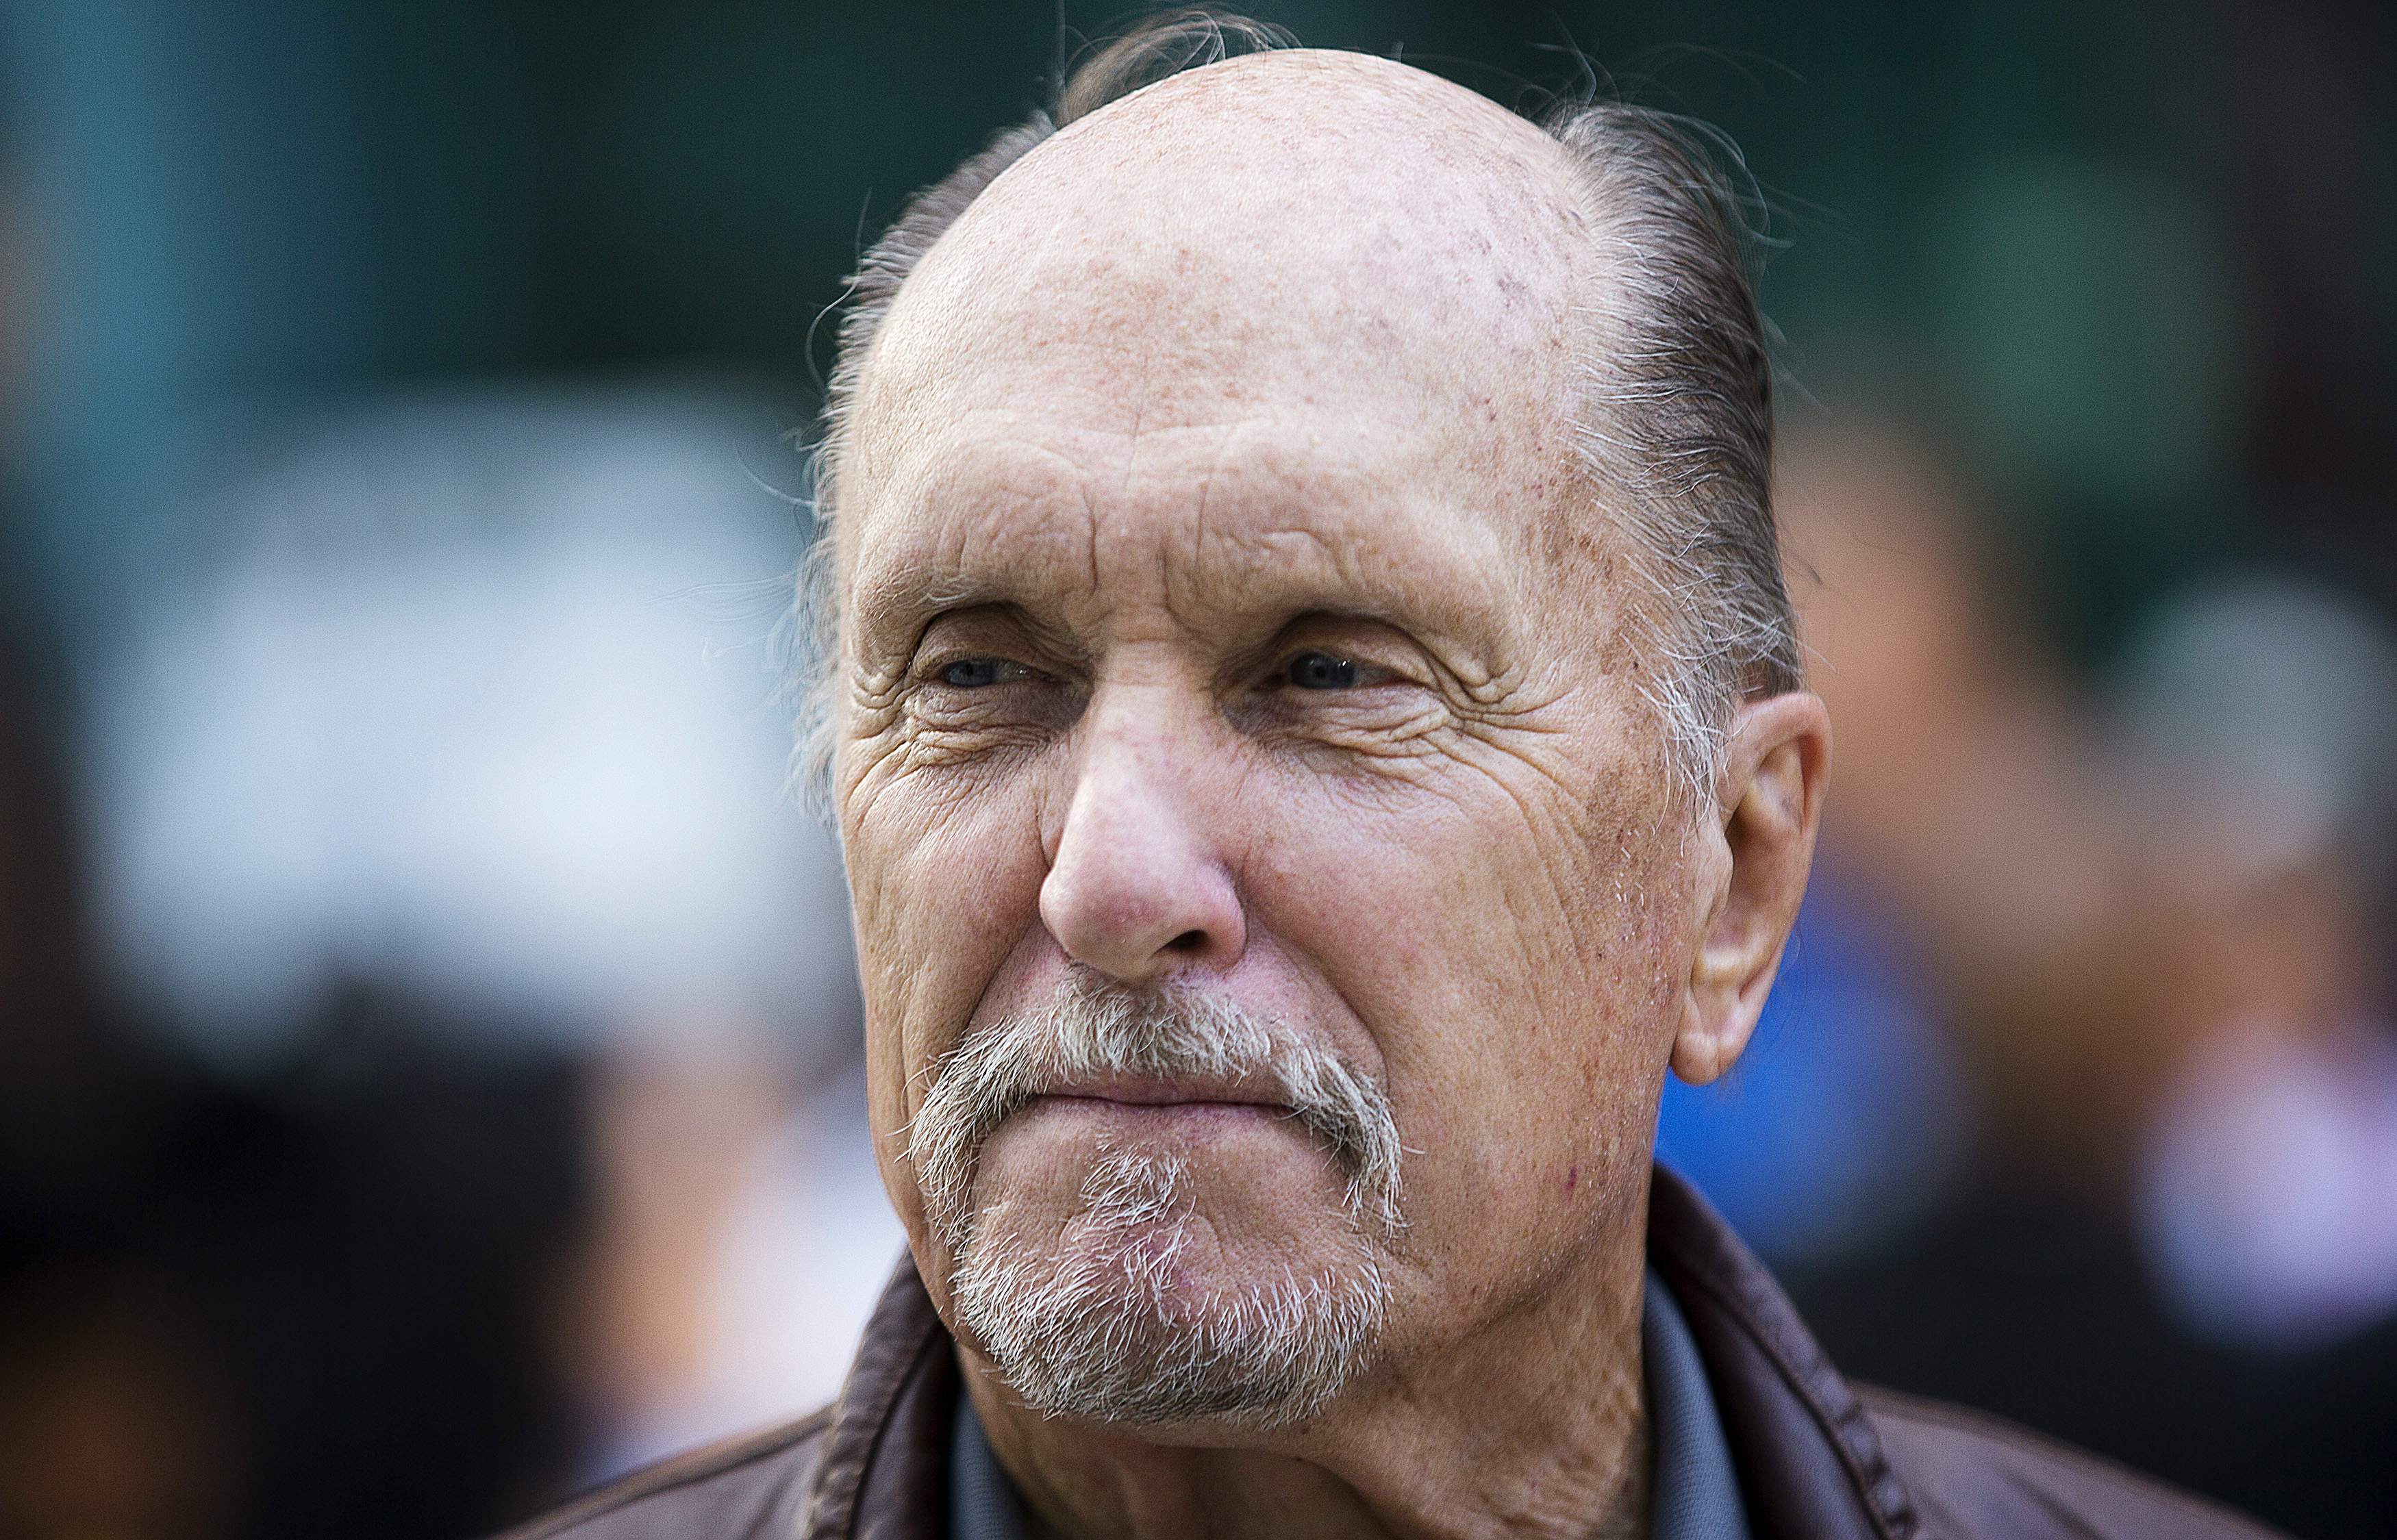 LOS ANGELES - With a career spanning seven decades, actor Robert Duvall has...